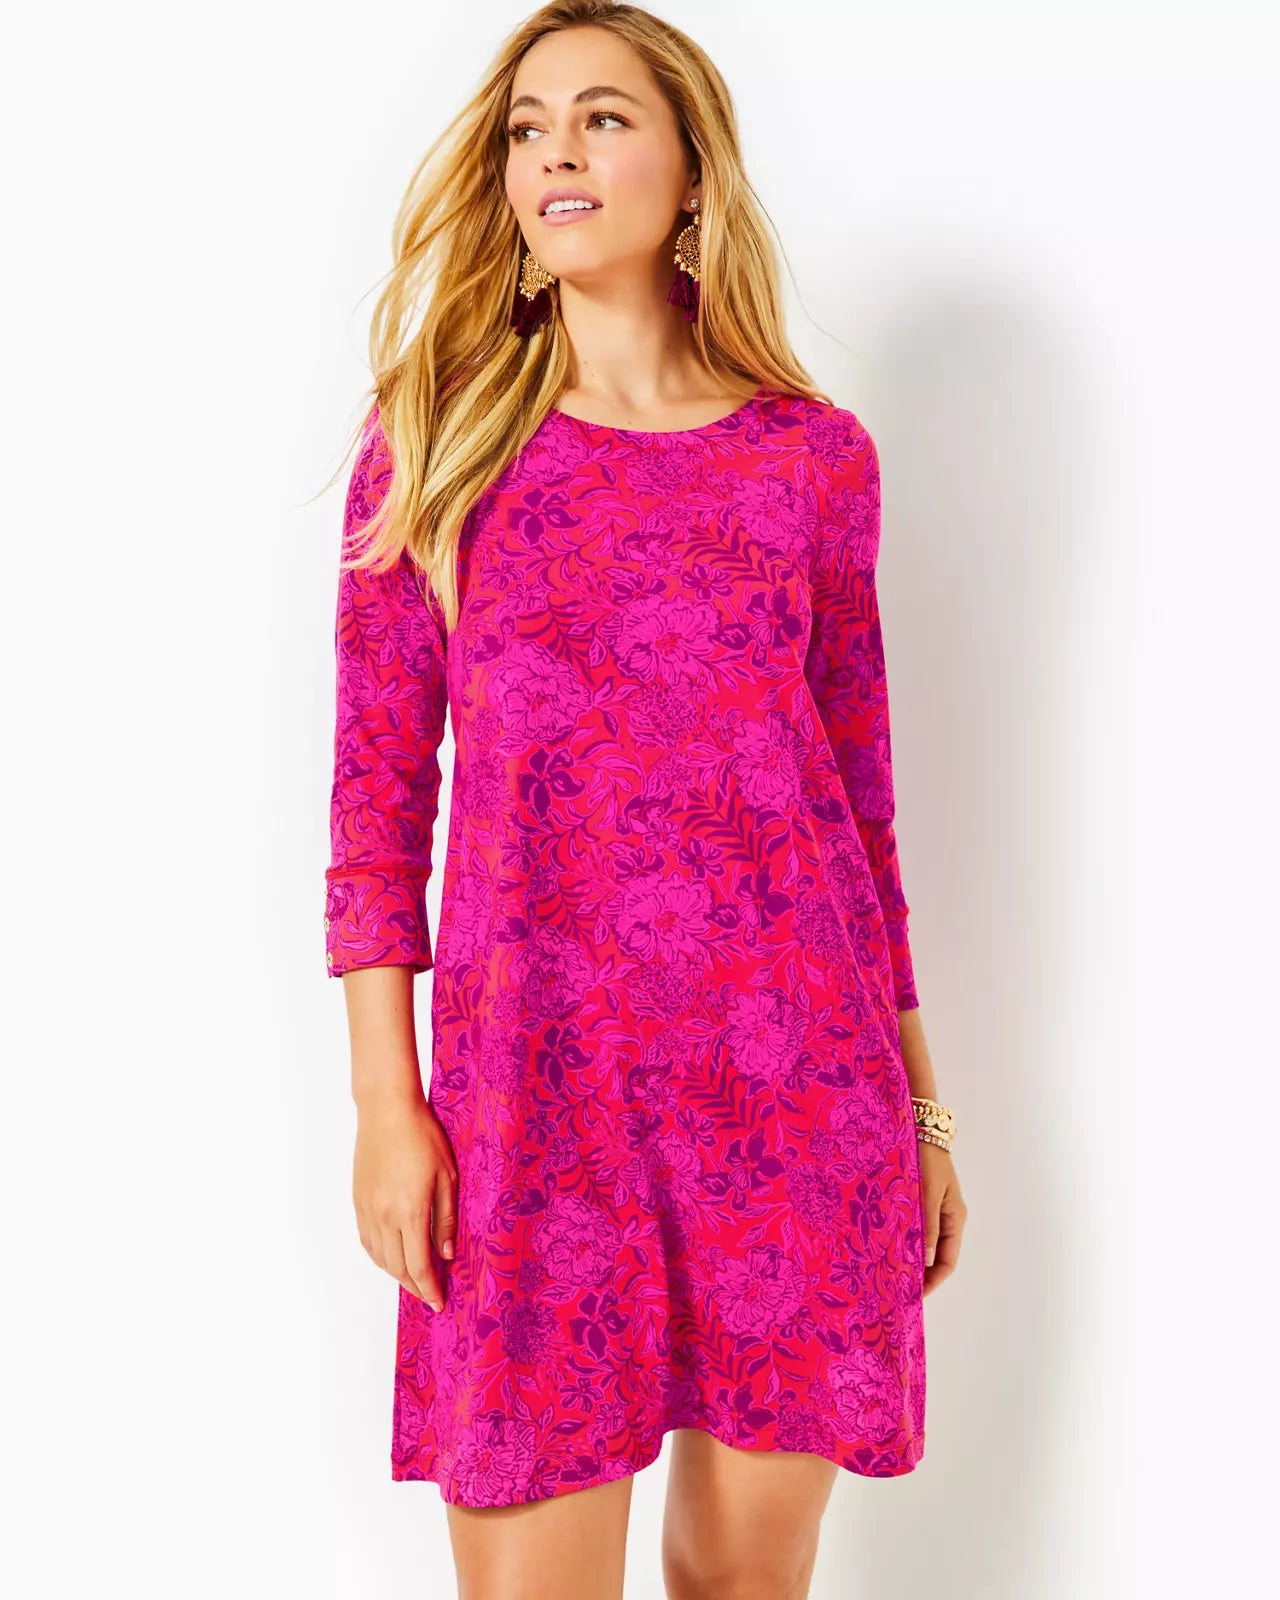 UPF 50 Solia Chilly Lilly Dress